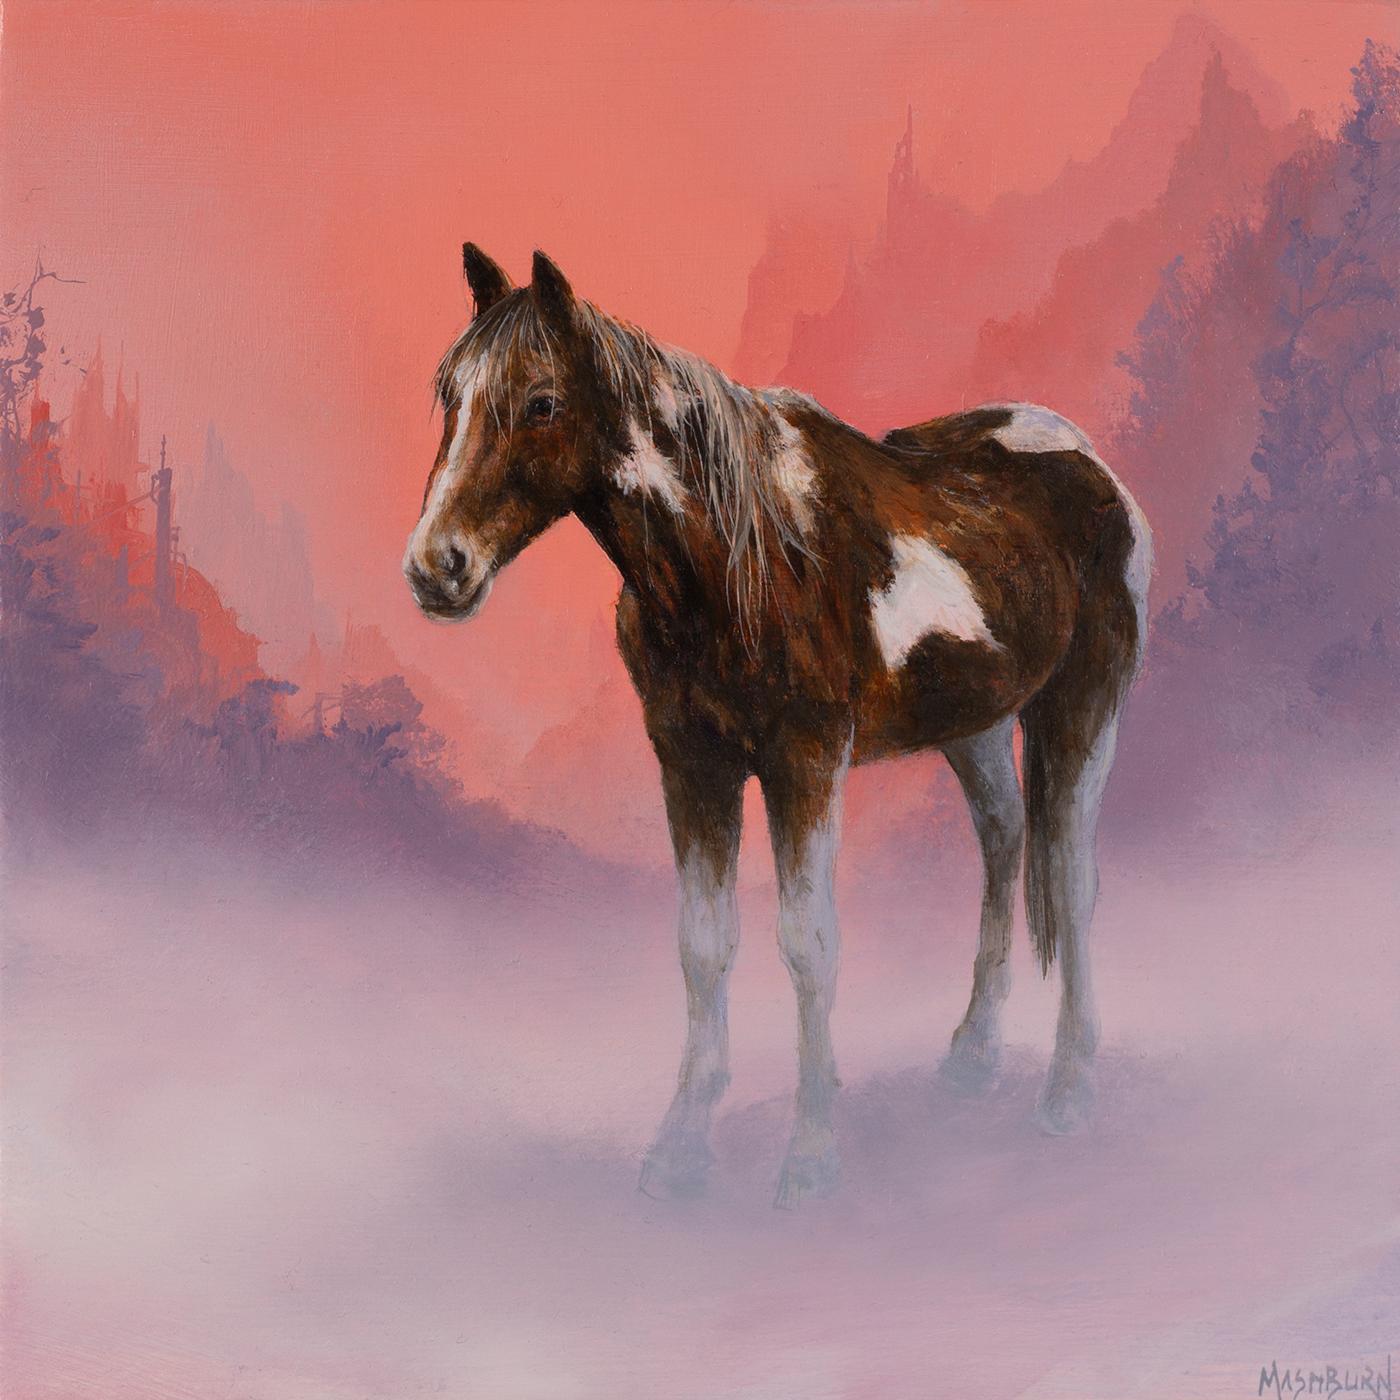 Brian Mashburn Figurative Painting - "Horse in Fog, " Oil Painting